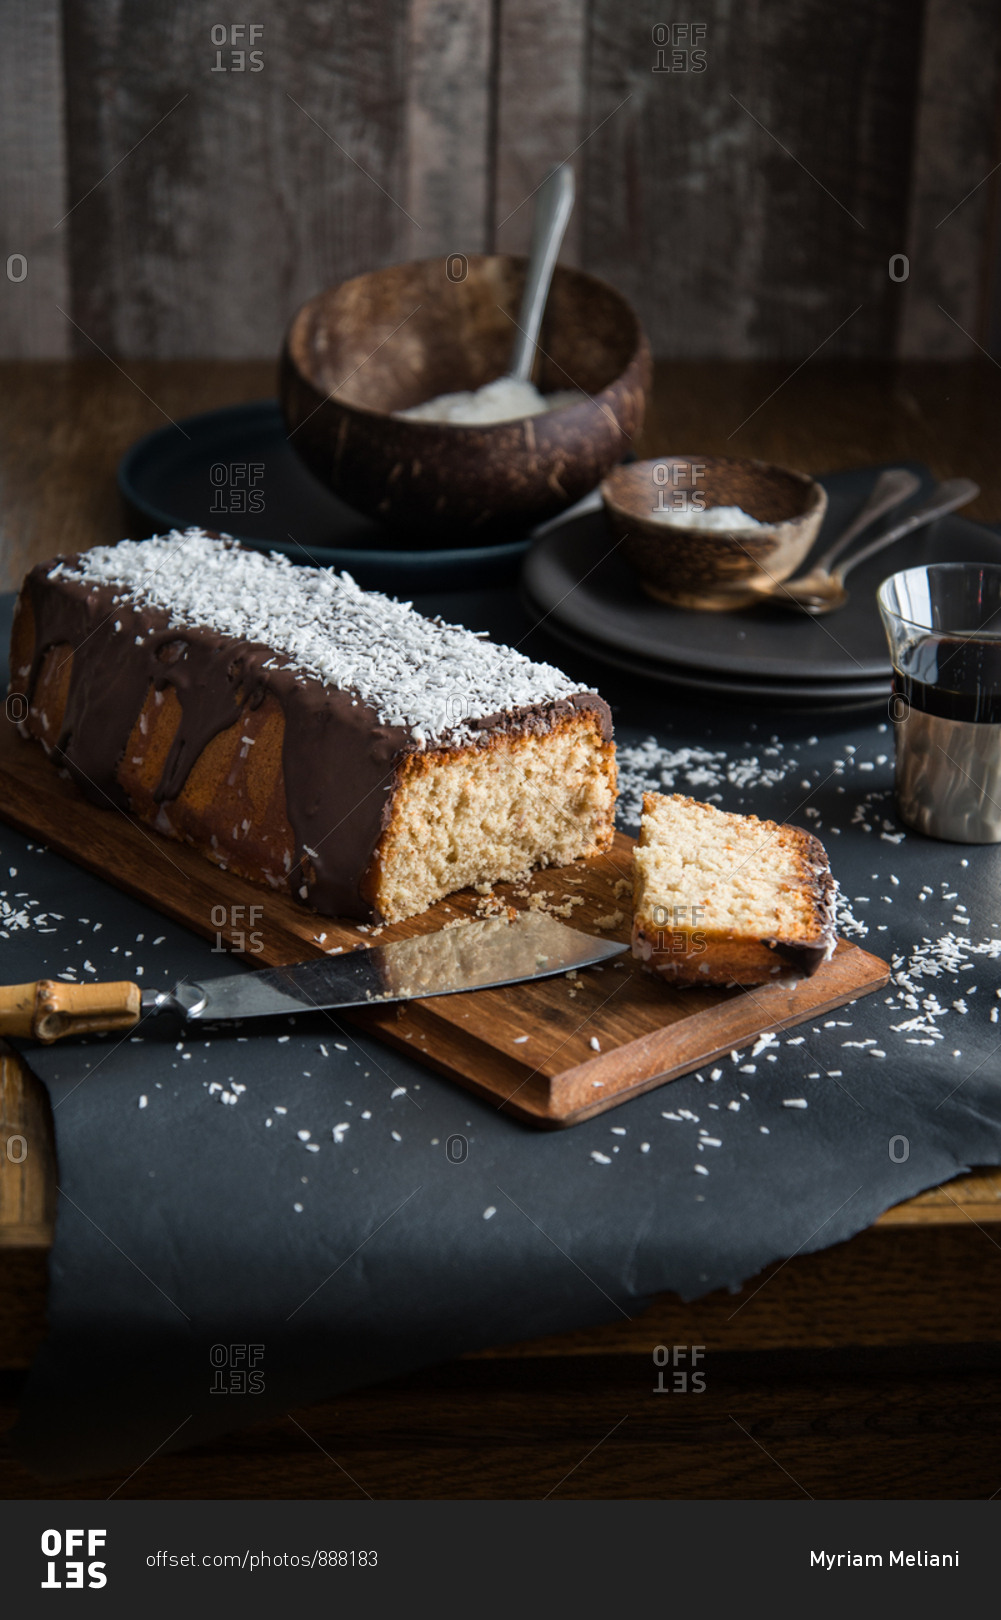 A coconut pound cake glazed with chocolate and coconut rasp ready to be shared